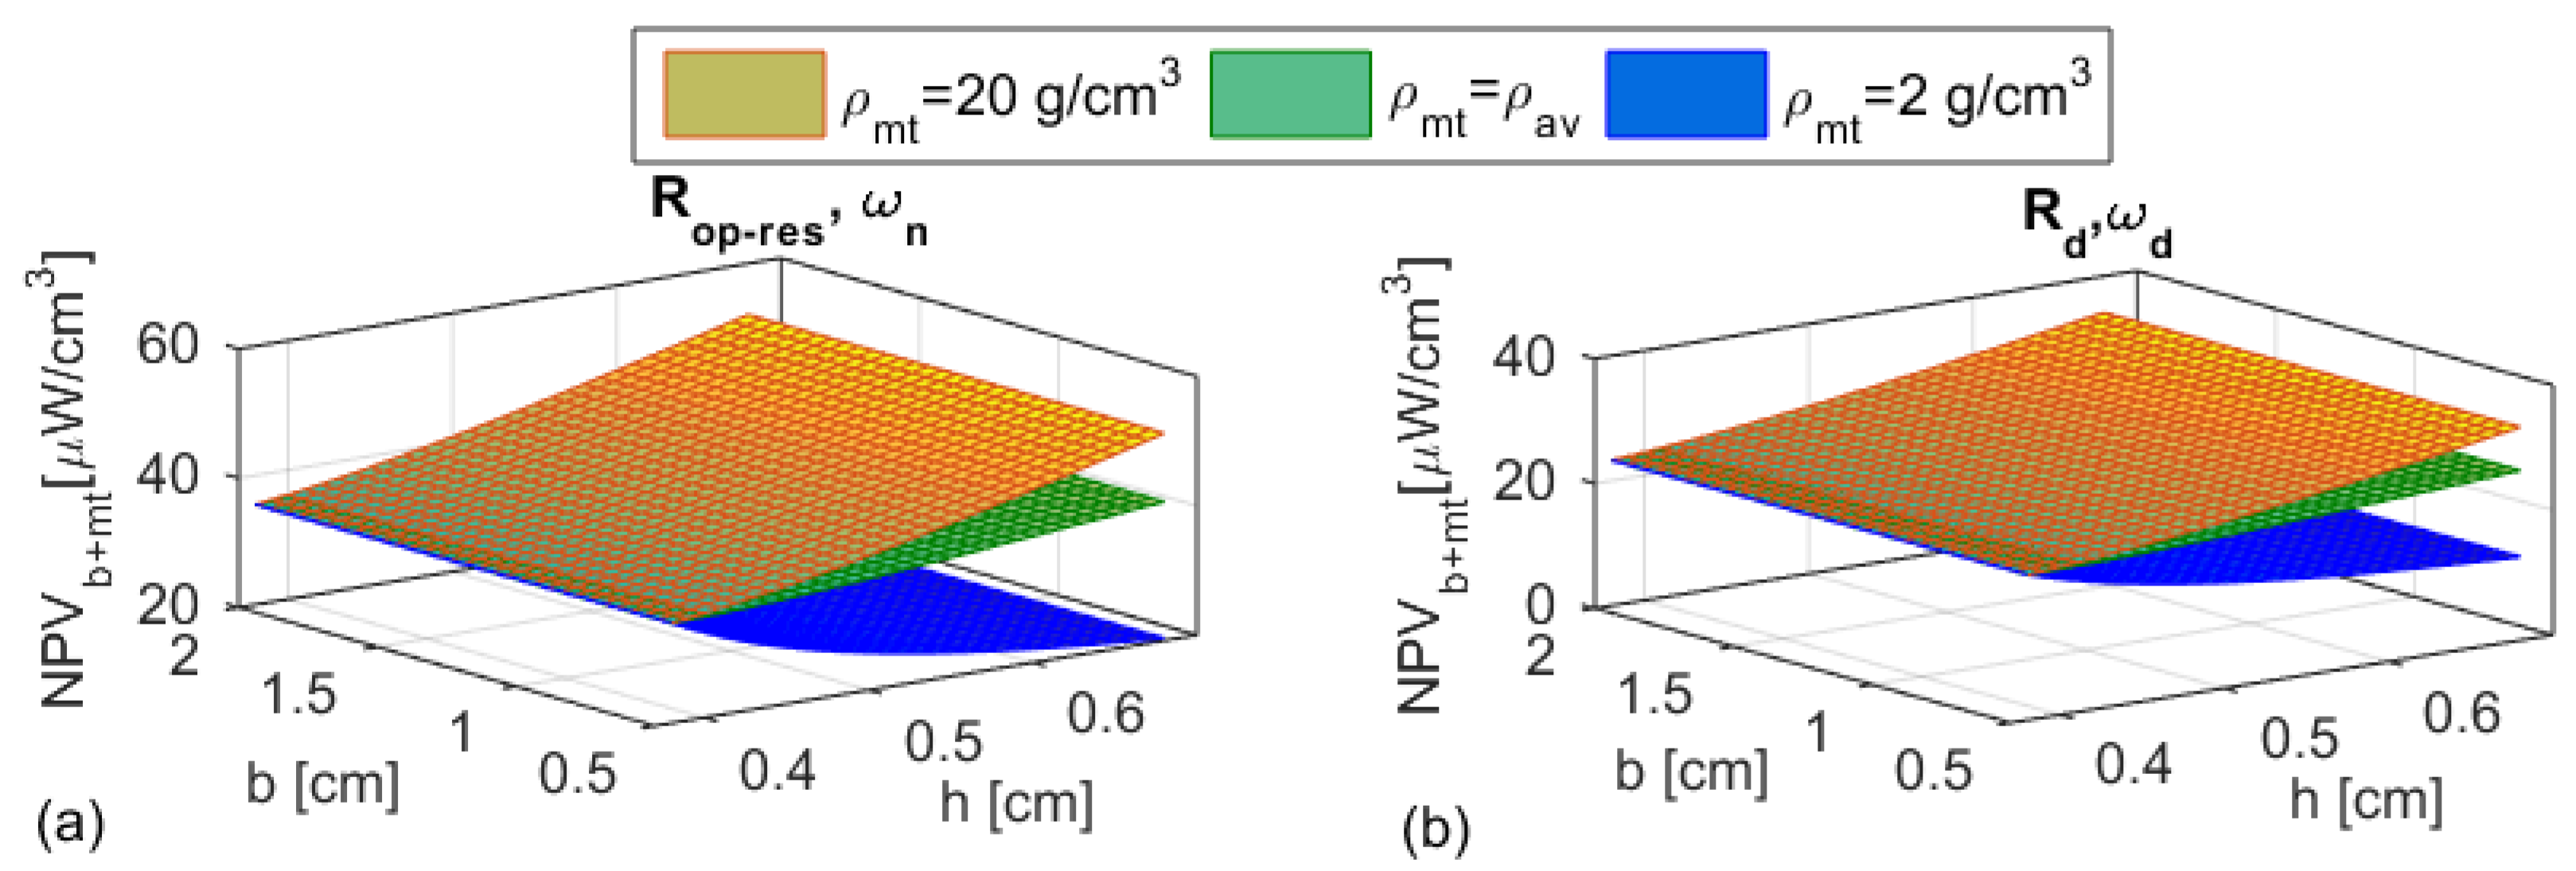 Applied Sciences Free Full Text A Study On Important Issues For Estimating The Effectiveness Of The Proposed Piezoelectric Energy Harvesters Under Volume Constraints Html